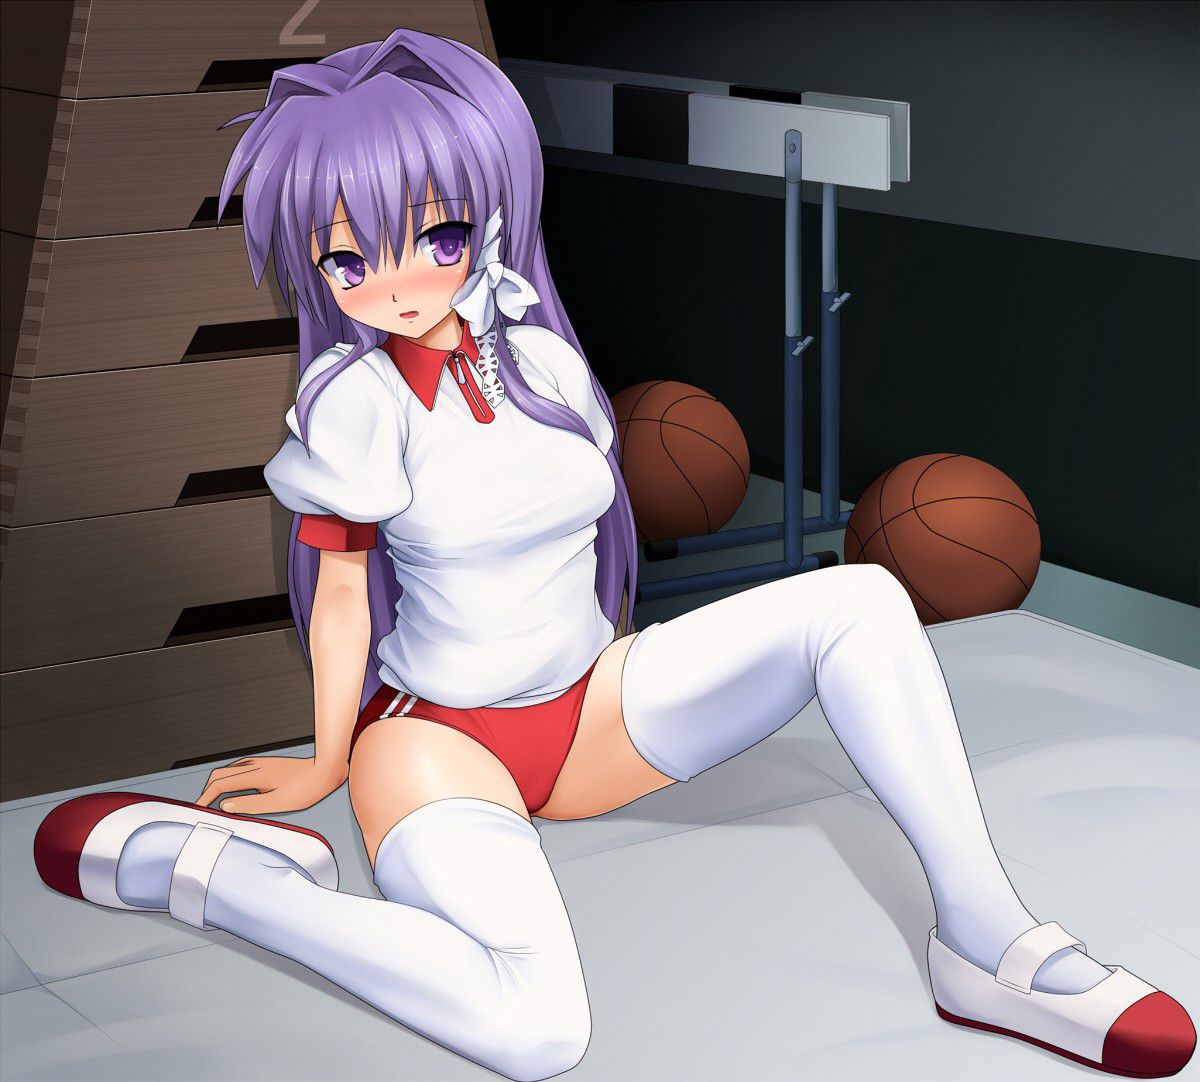 [some senses of incongruity] the second eroticism image which wear the top though is bloomers, a gym suit, and wear 27